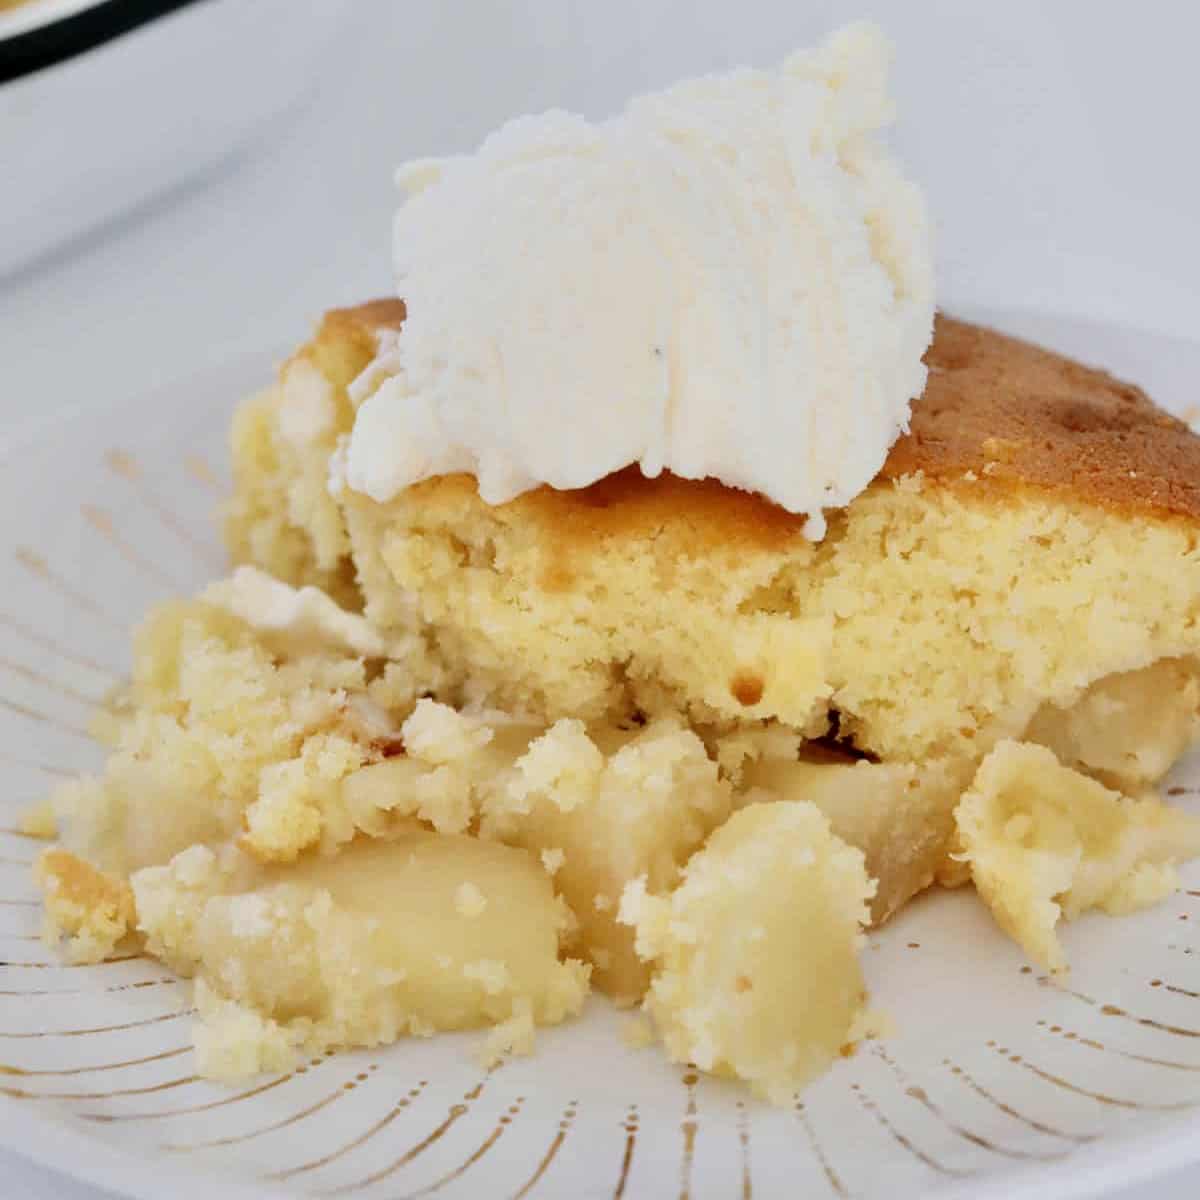 Fluffy sponge with apple underneath and ice cream on top.